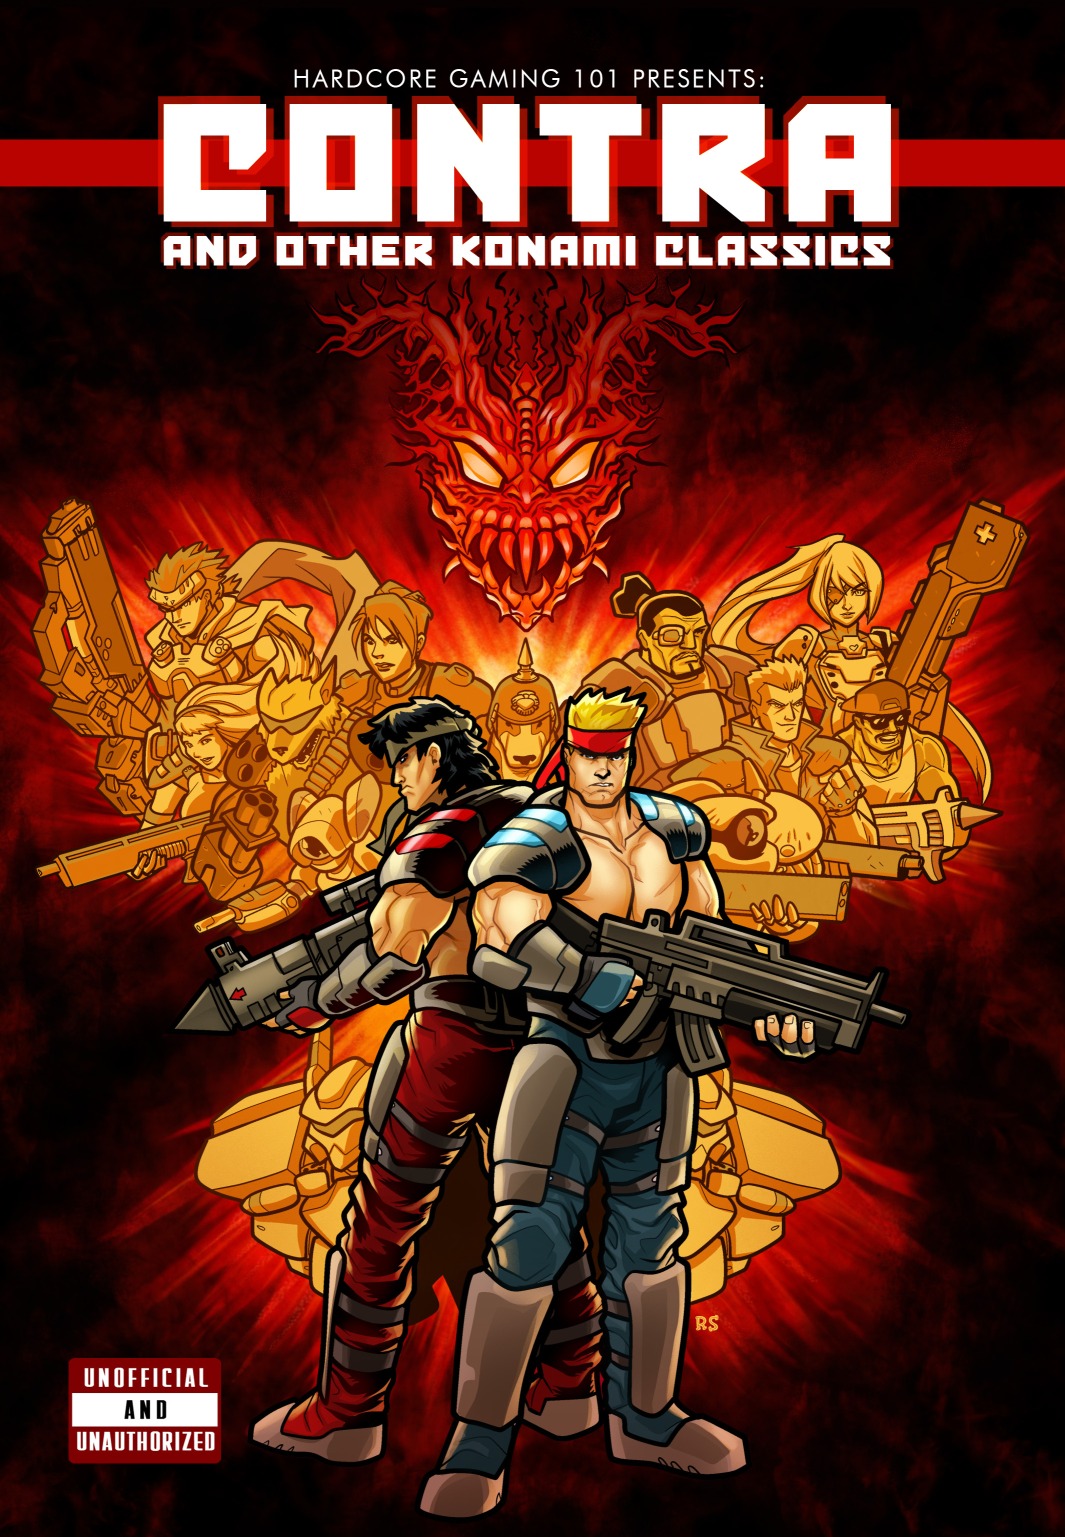 HG101 Presents: Contra and Other Konami Classics by Hardcore 